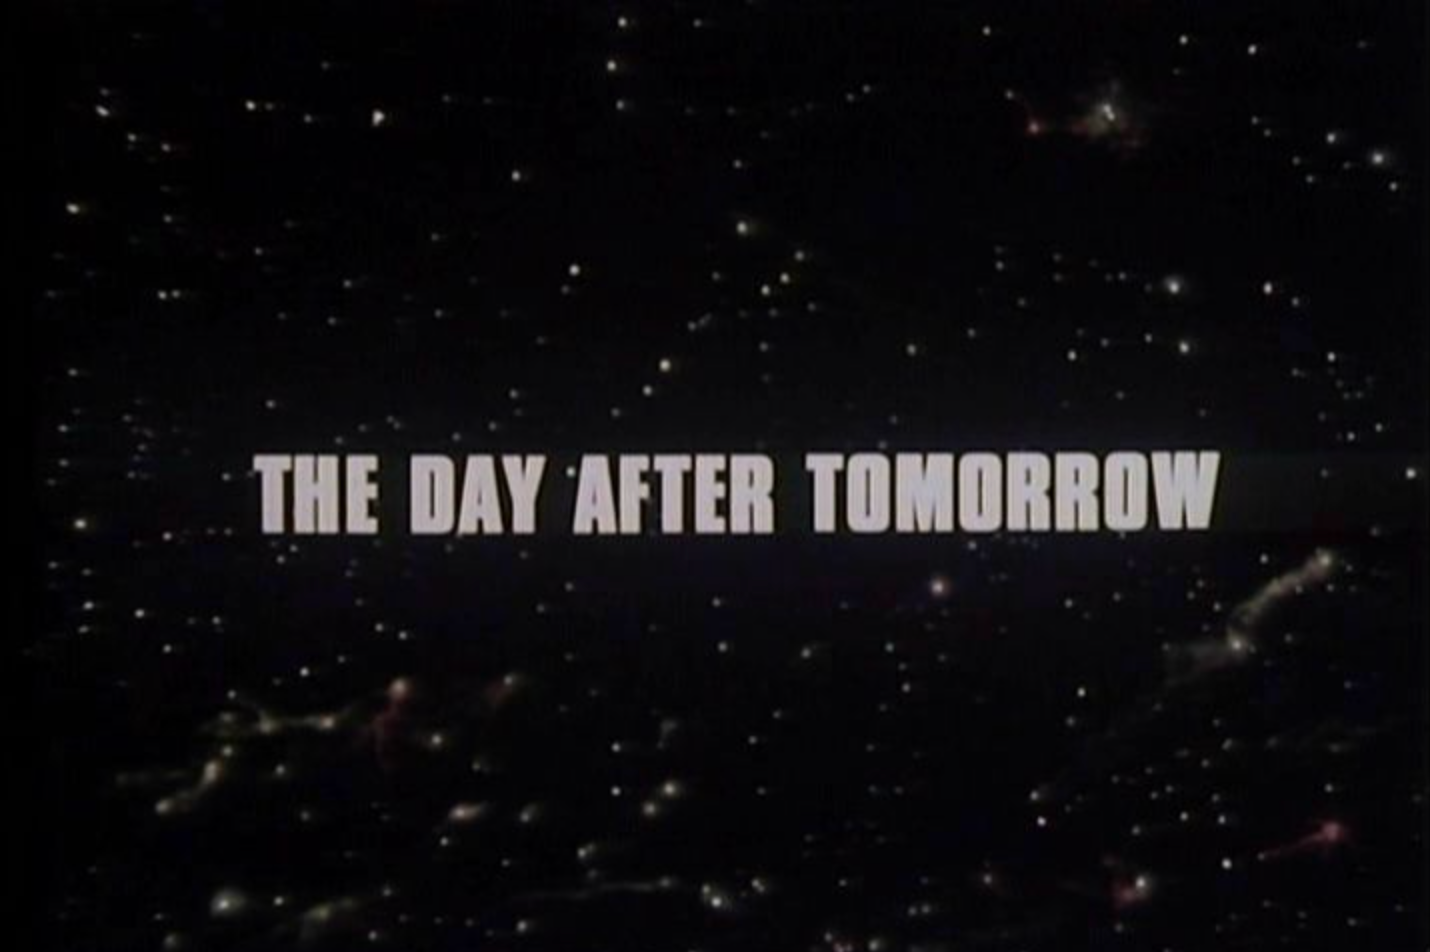 The Day After Tomorrow | Gerry Anderson’s Afterschool Special is an Overlooked Gem